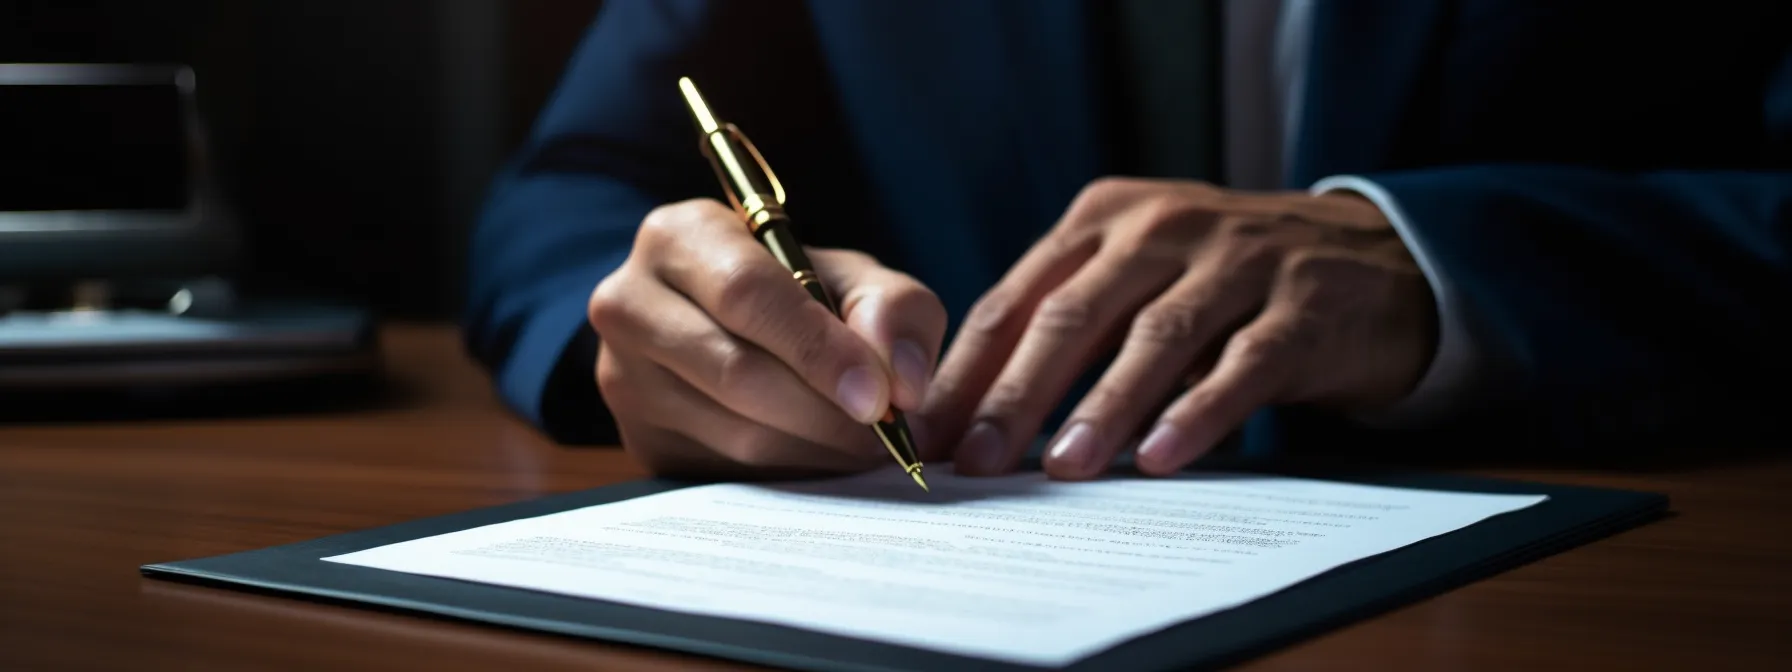 a businessman signing a contract with an arbitration clause included.